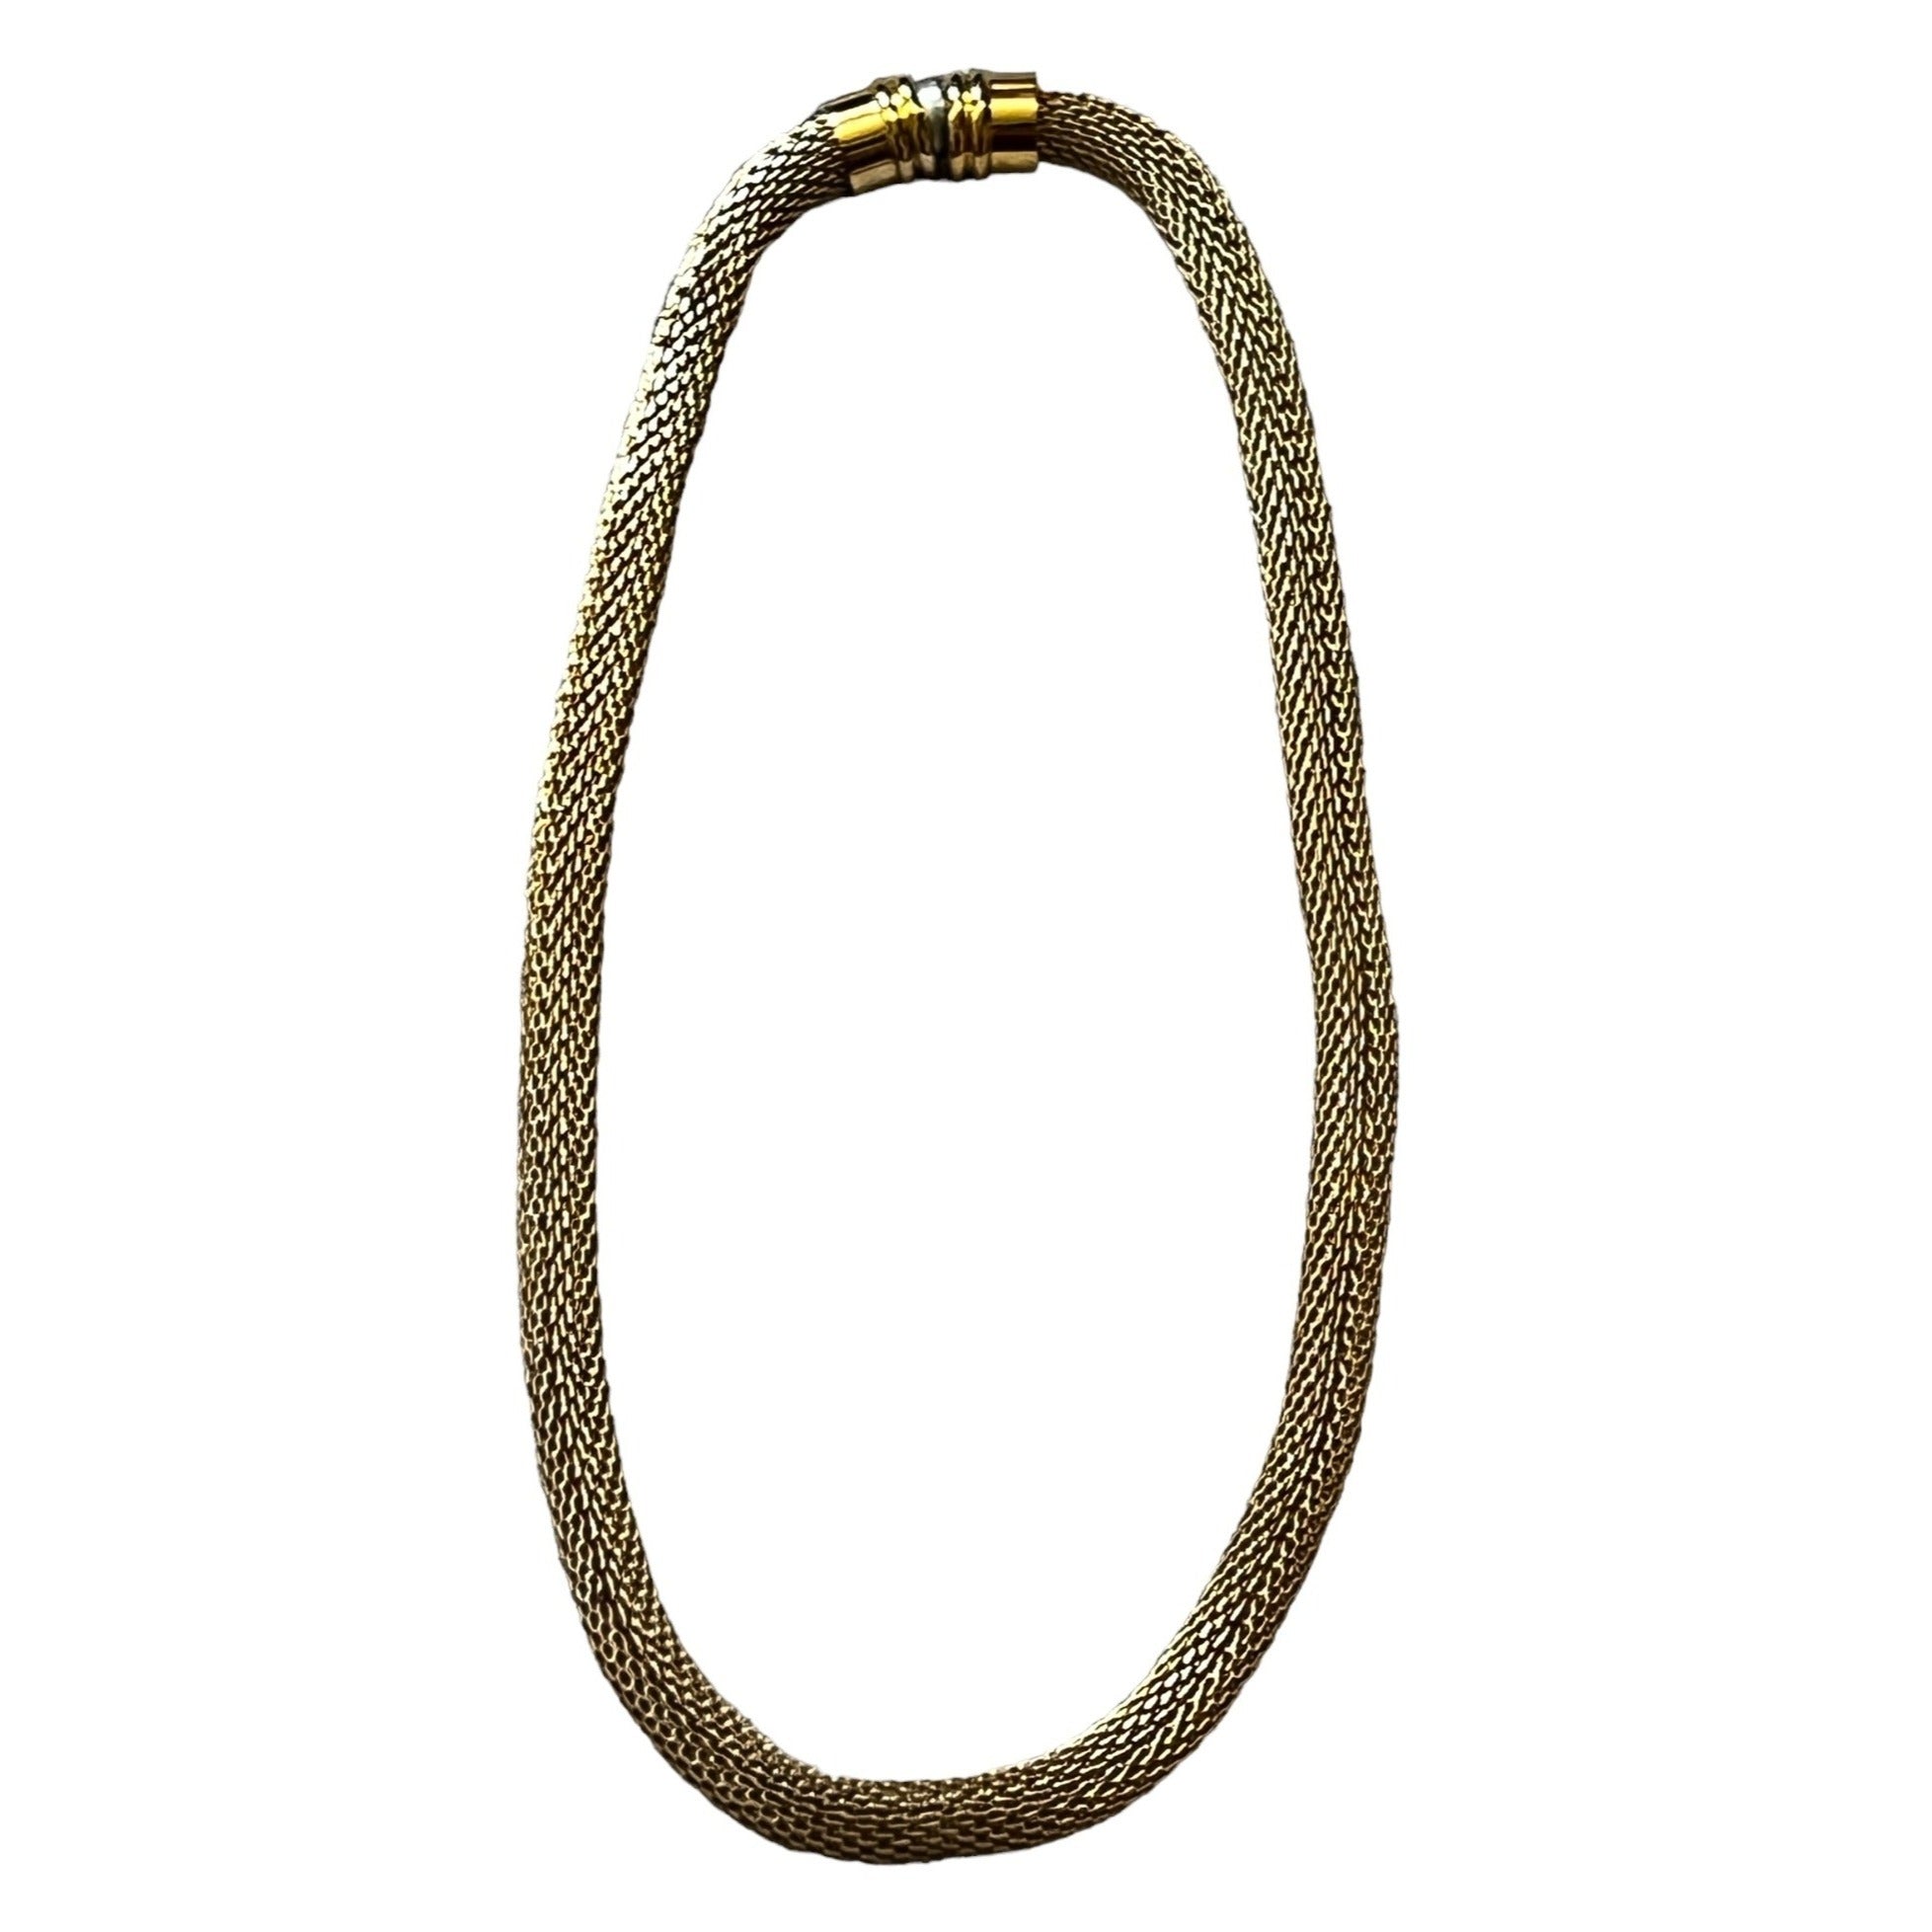 Vintage Magnetic Gold Chain Puffed Metal Necklace 17" long